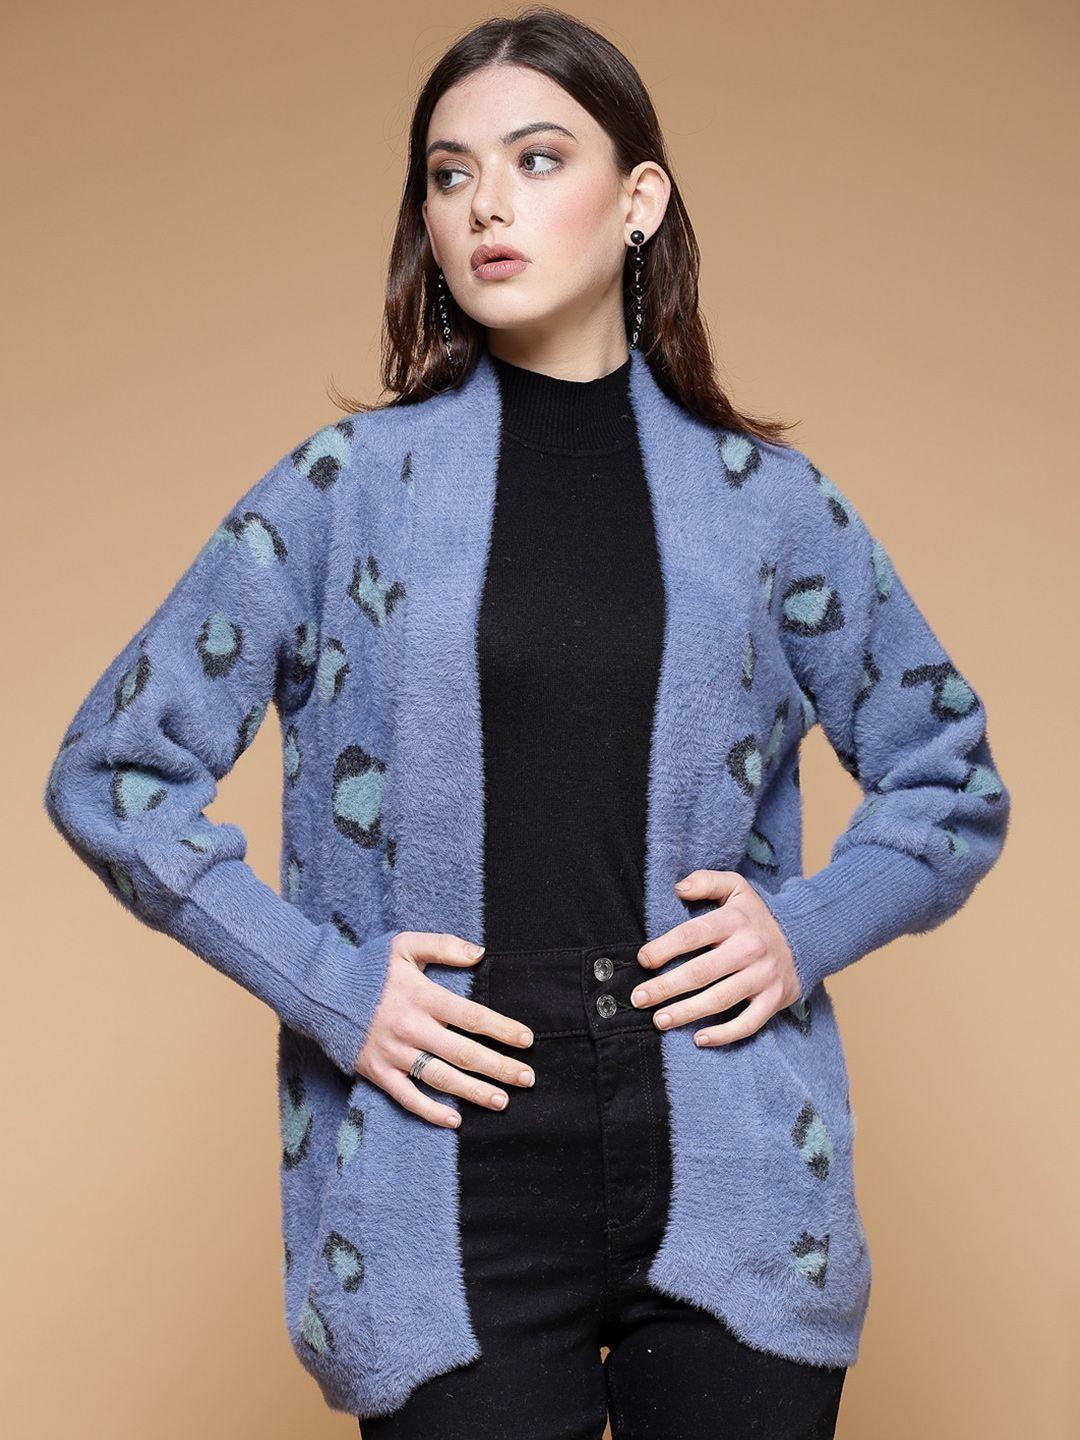 juelle-abstract-printed-open-front-shrug